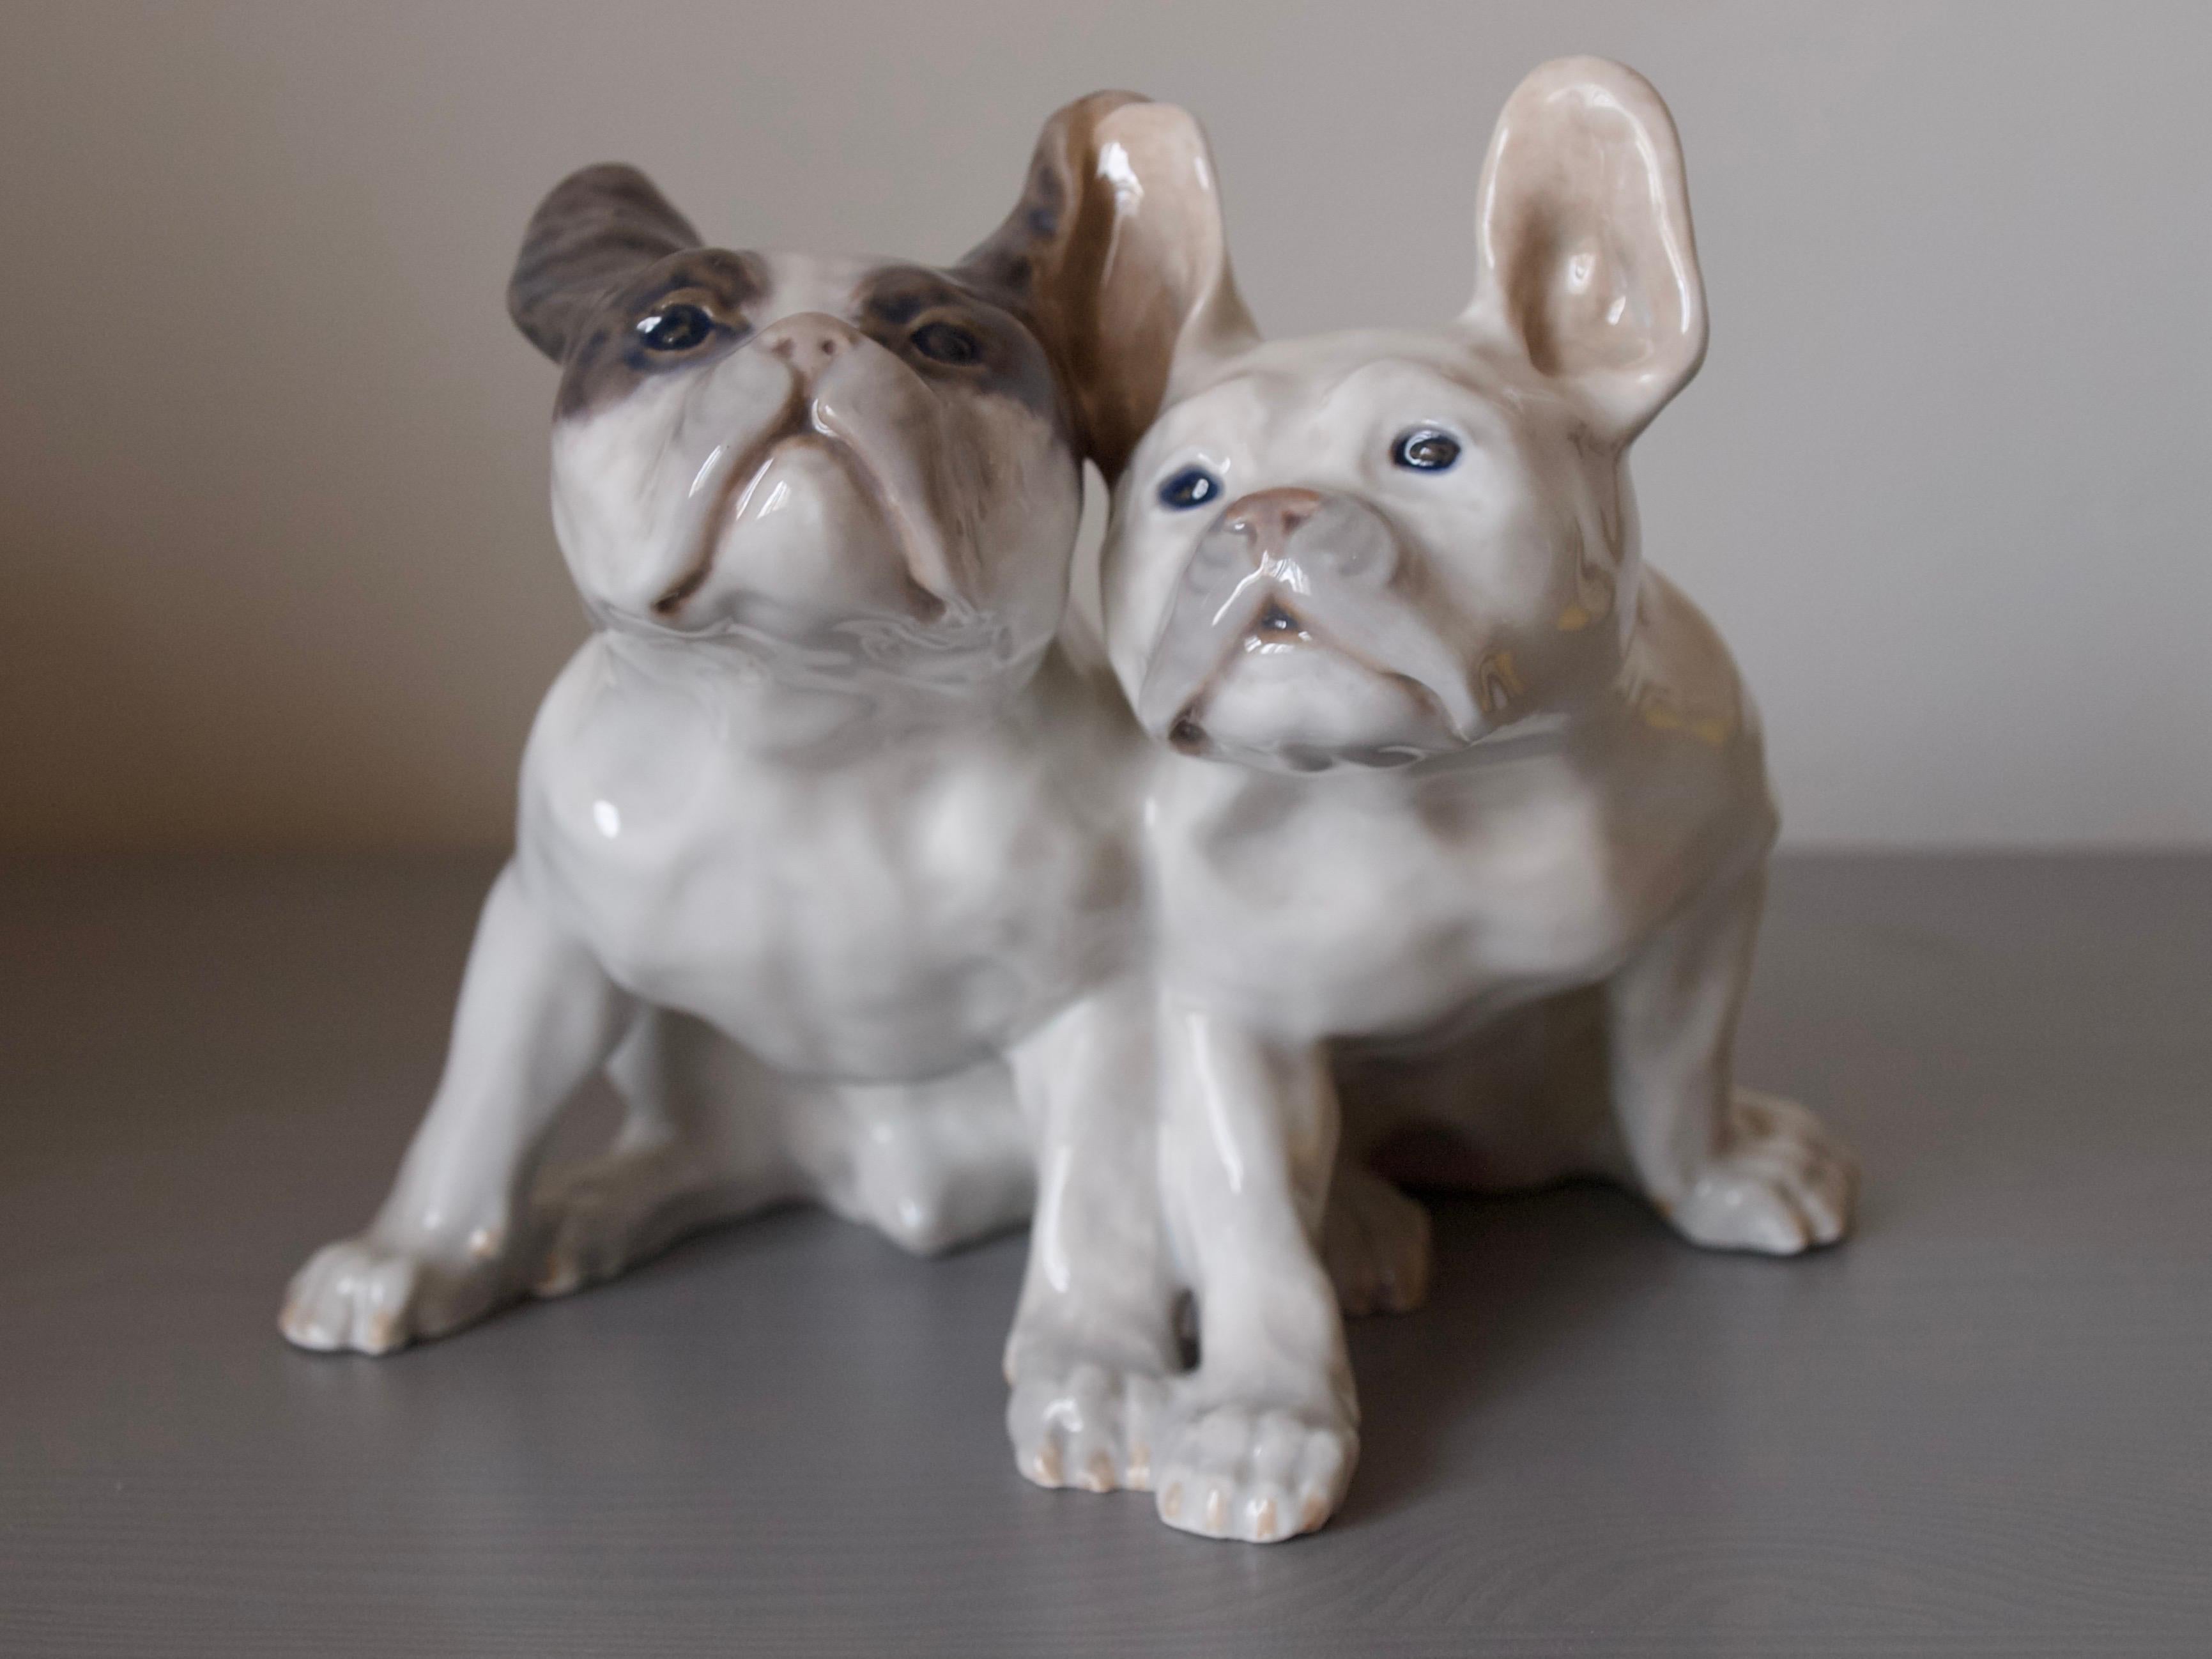 Extra rare French bulldogs designed by Knud Kyhn
in 1908 and made by porcelain Royal Copenhagen,
Denmark with number 1452 / 957.

Knud Kyhn (1880-1969) was one of Denmark’s leading ceramic artists in the 20th century. After his art studies, he